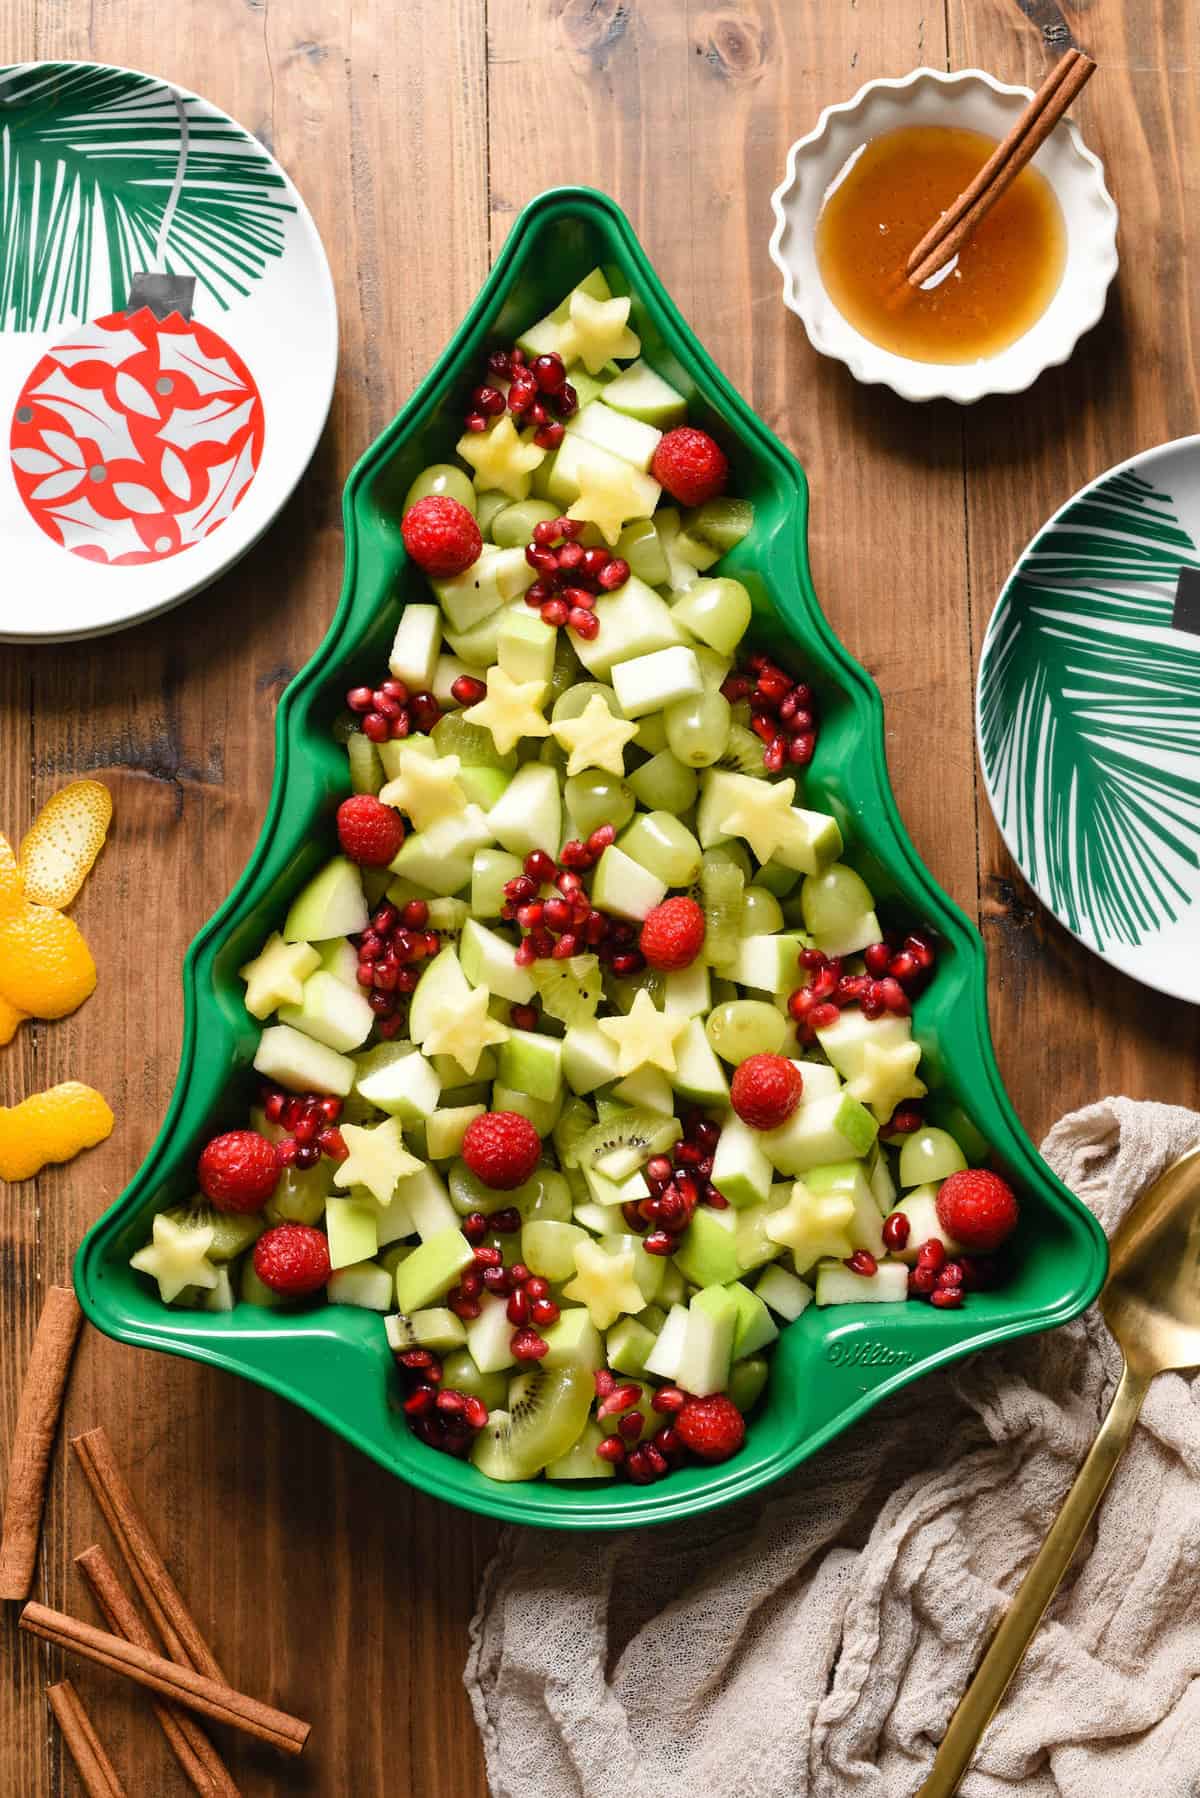 Christmas fruit salad made with grapes, raspberries, pomegranate seeds, kiwi, pineapple and green apple, arranged in a green Christmas tree shaped baking pan.